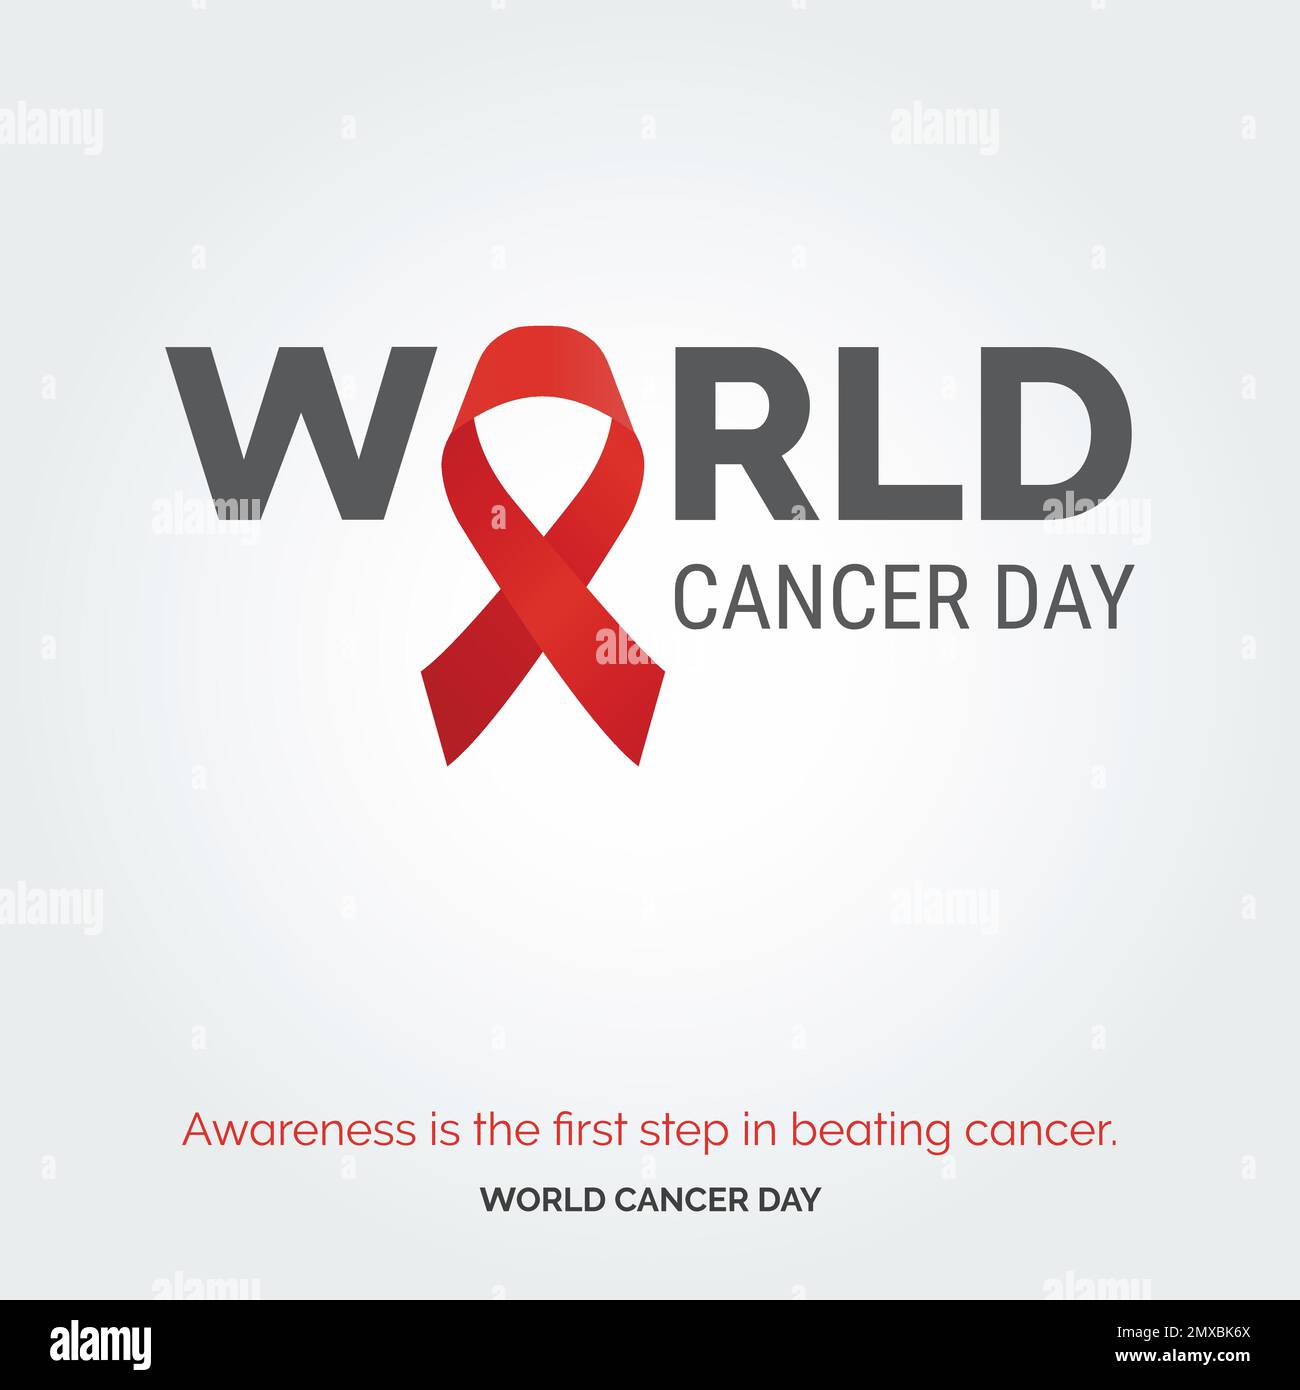 Awareness is the first step in beating cancer - World Cancer Day Stock Vector